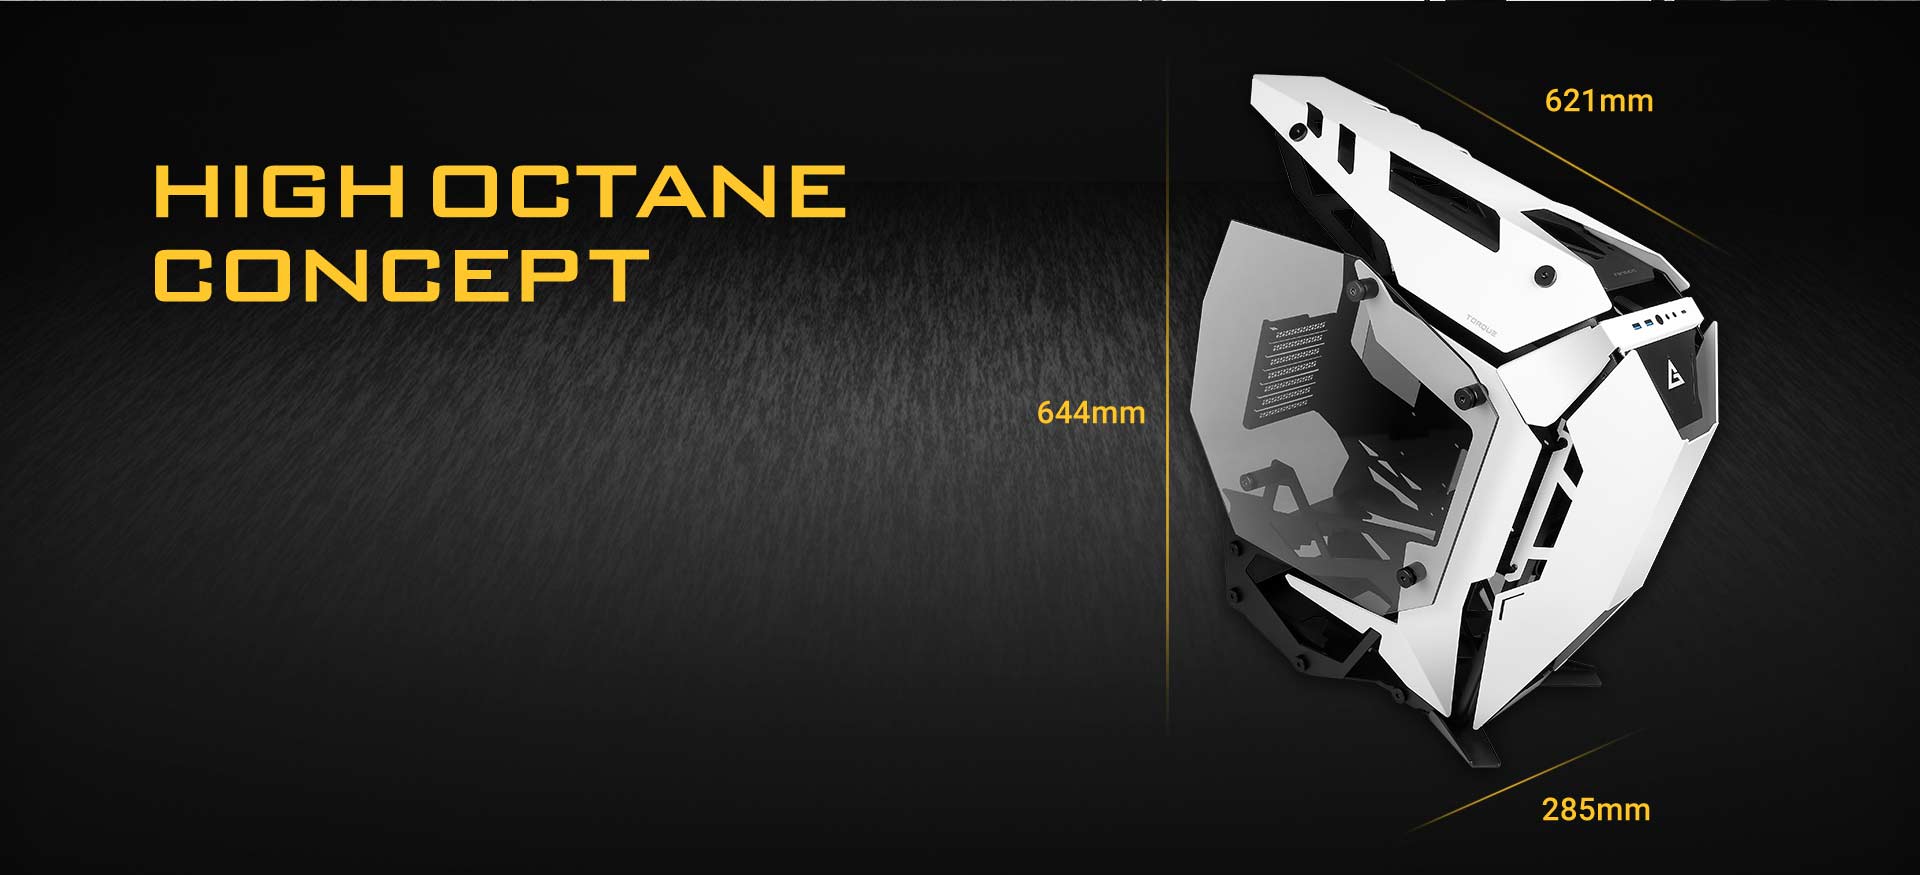 Antec Torque Angled Down to the Right with graphics and text indicating 644mm height, 285mm width and 621mm length. There is header text that reads: HIGH OCTANE CONCEPT